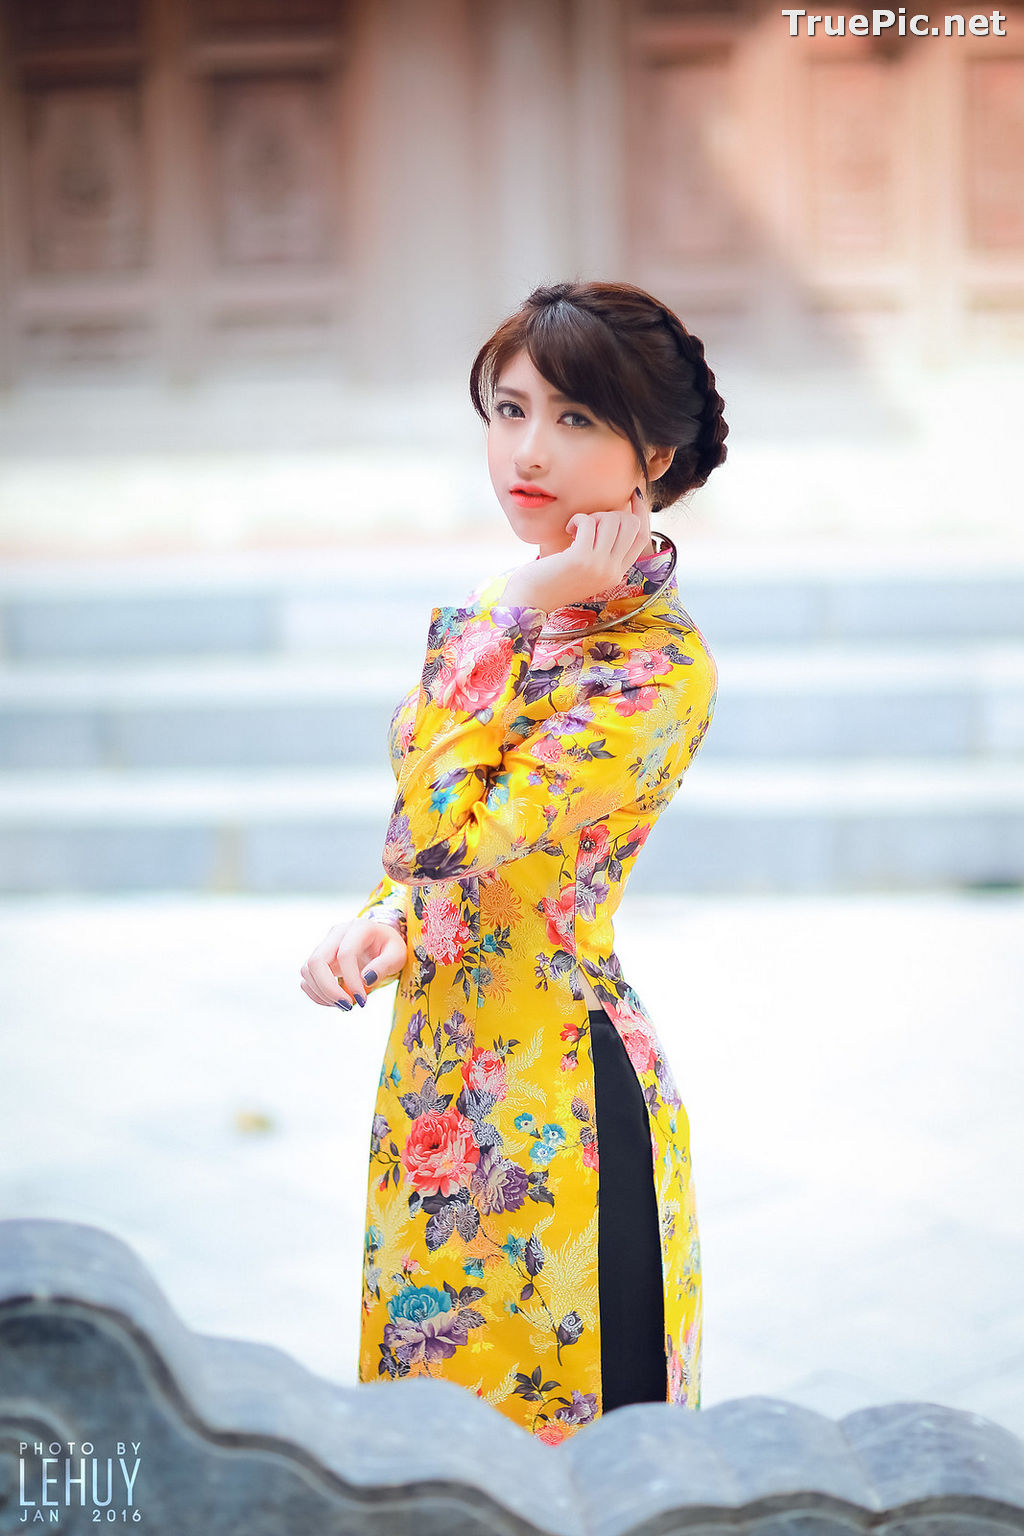 Image The Beauty of Vietnamese Girls with Traditional Dress (Ao Dai) #5 - TruePic.net - Picture-74